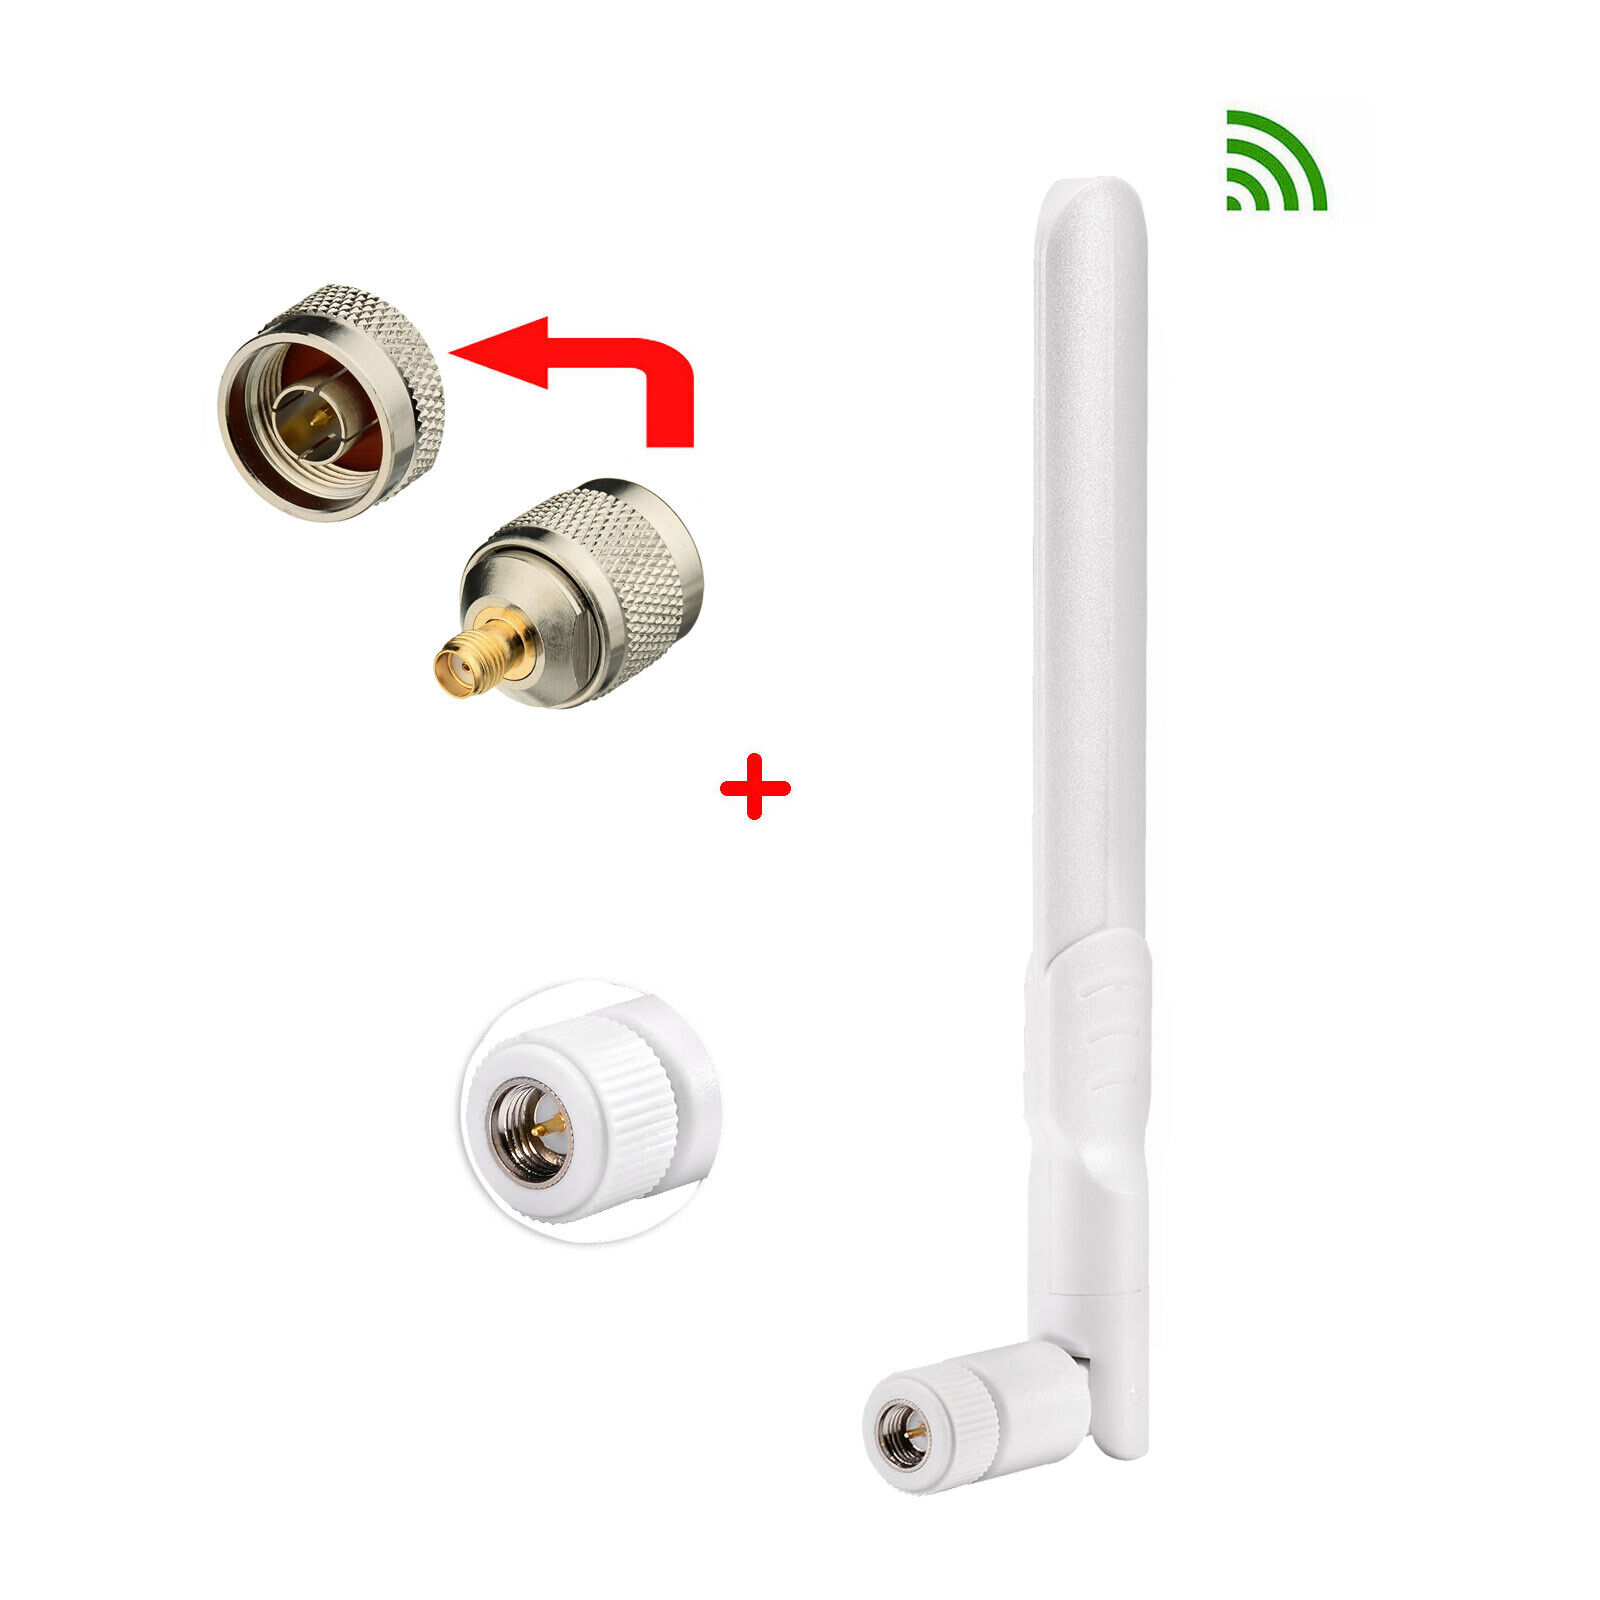 4G LTE 700-2600MHz N Male Indoor Whip Antenna Cell Phone Signal Booster antenna